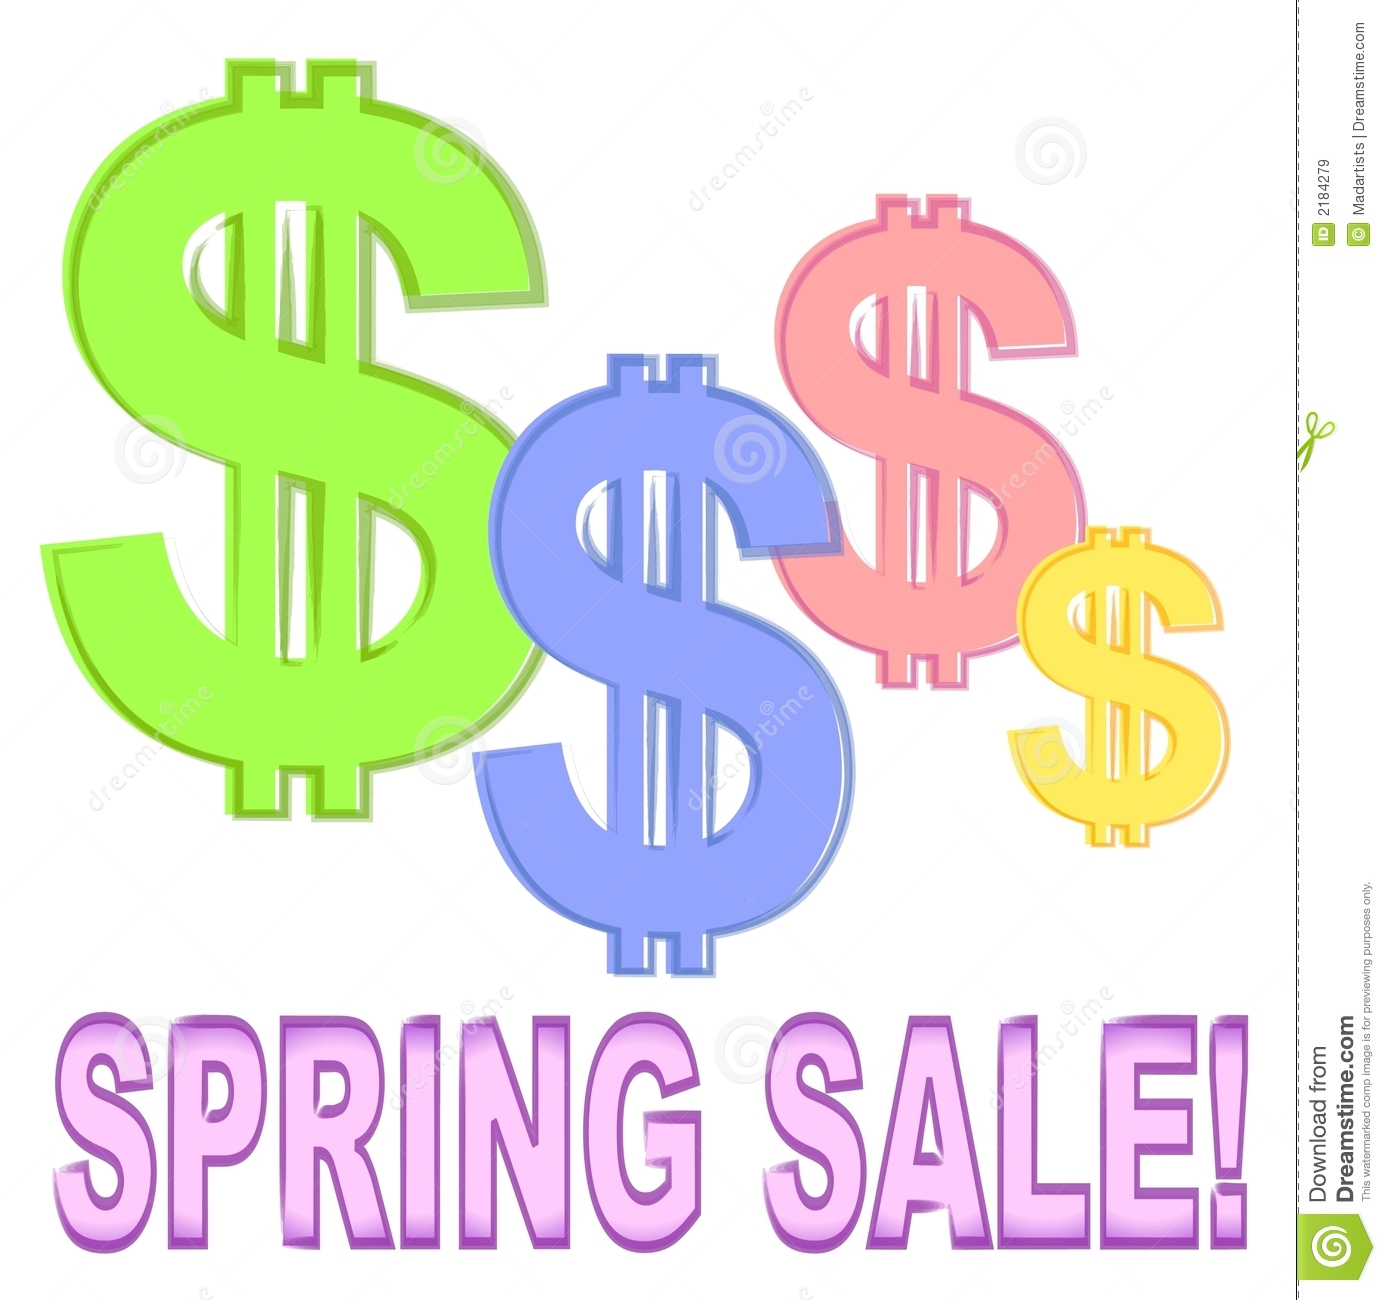 Retail Business Illustration Of Dollar Signs In Pastel Spring Colors